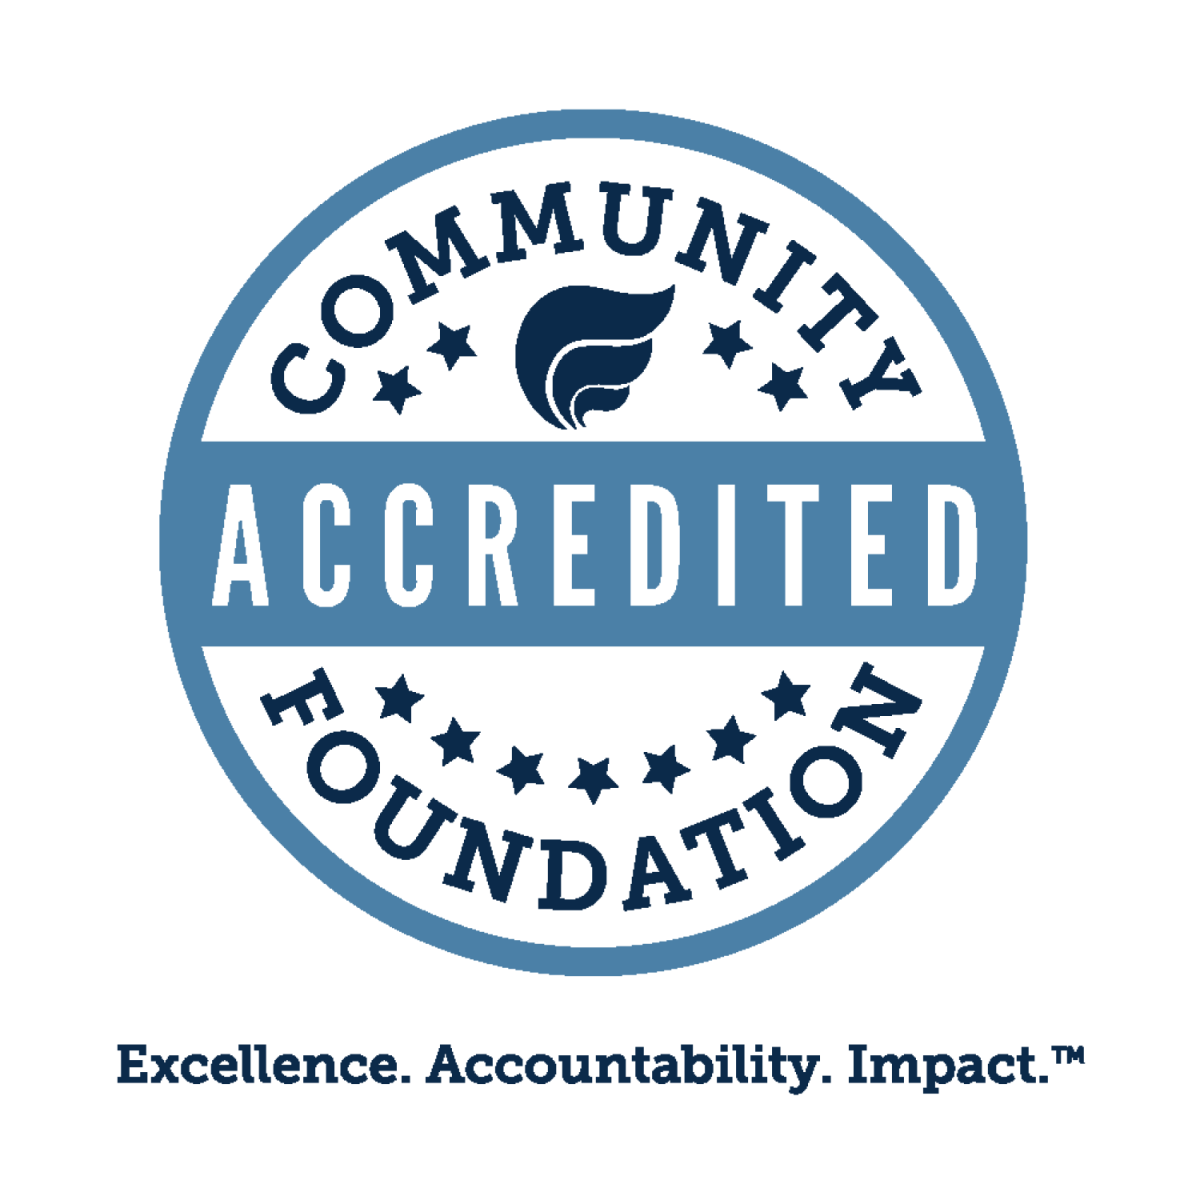 Council on Foundations Community Accredited Foundation TCF Logo